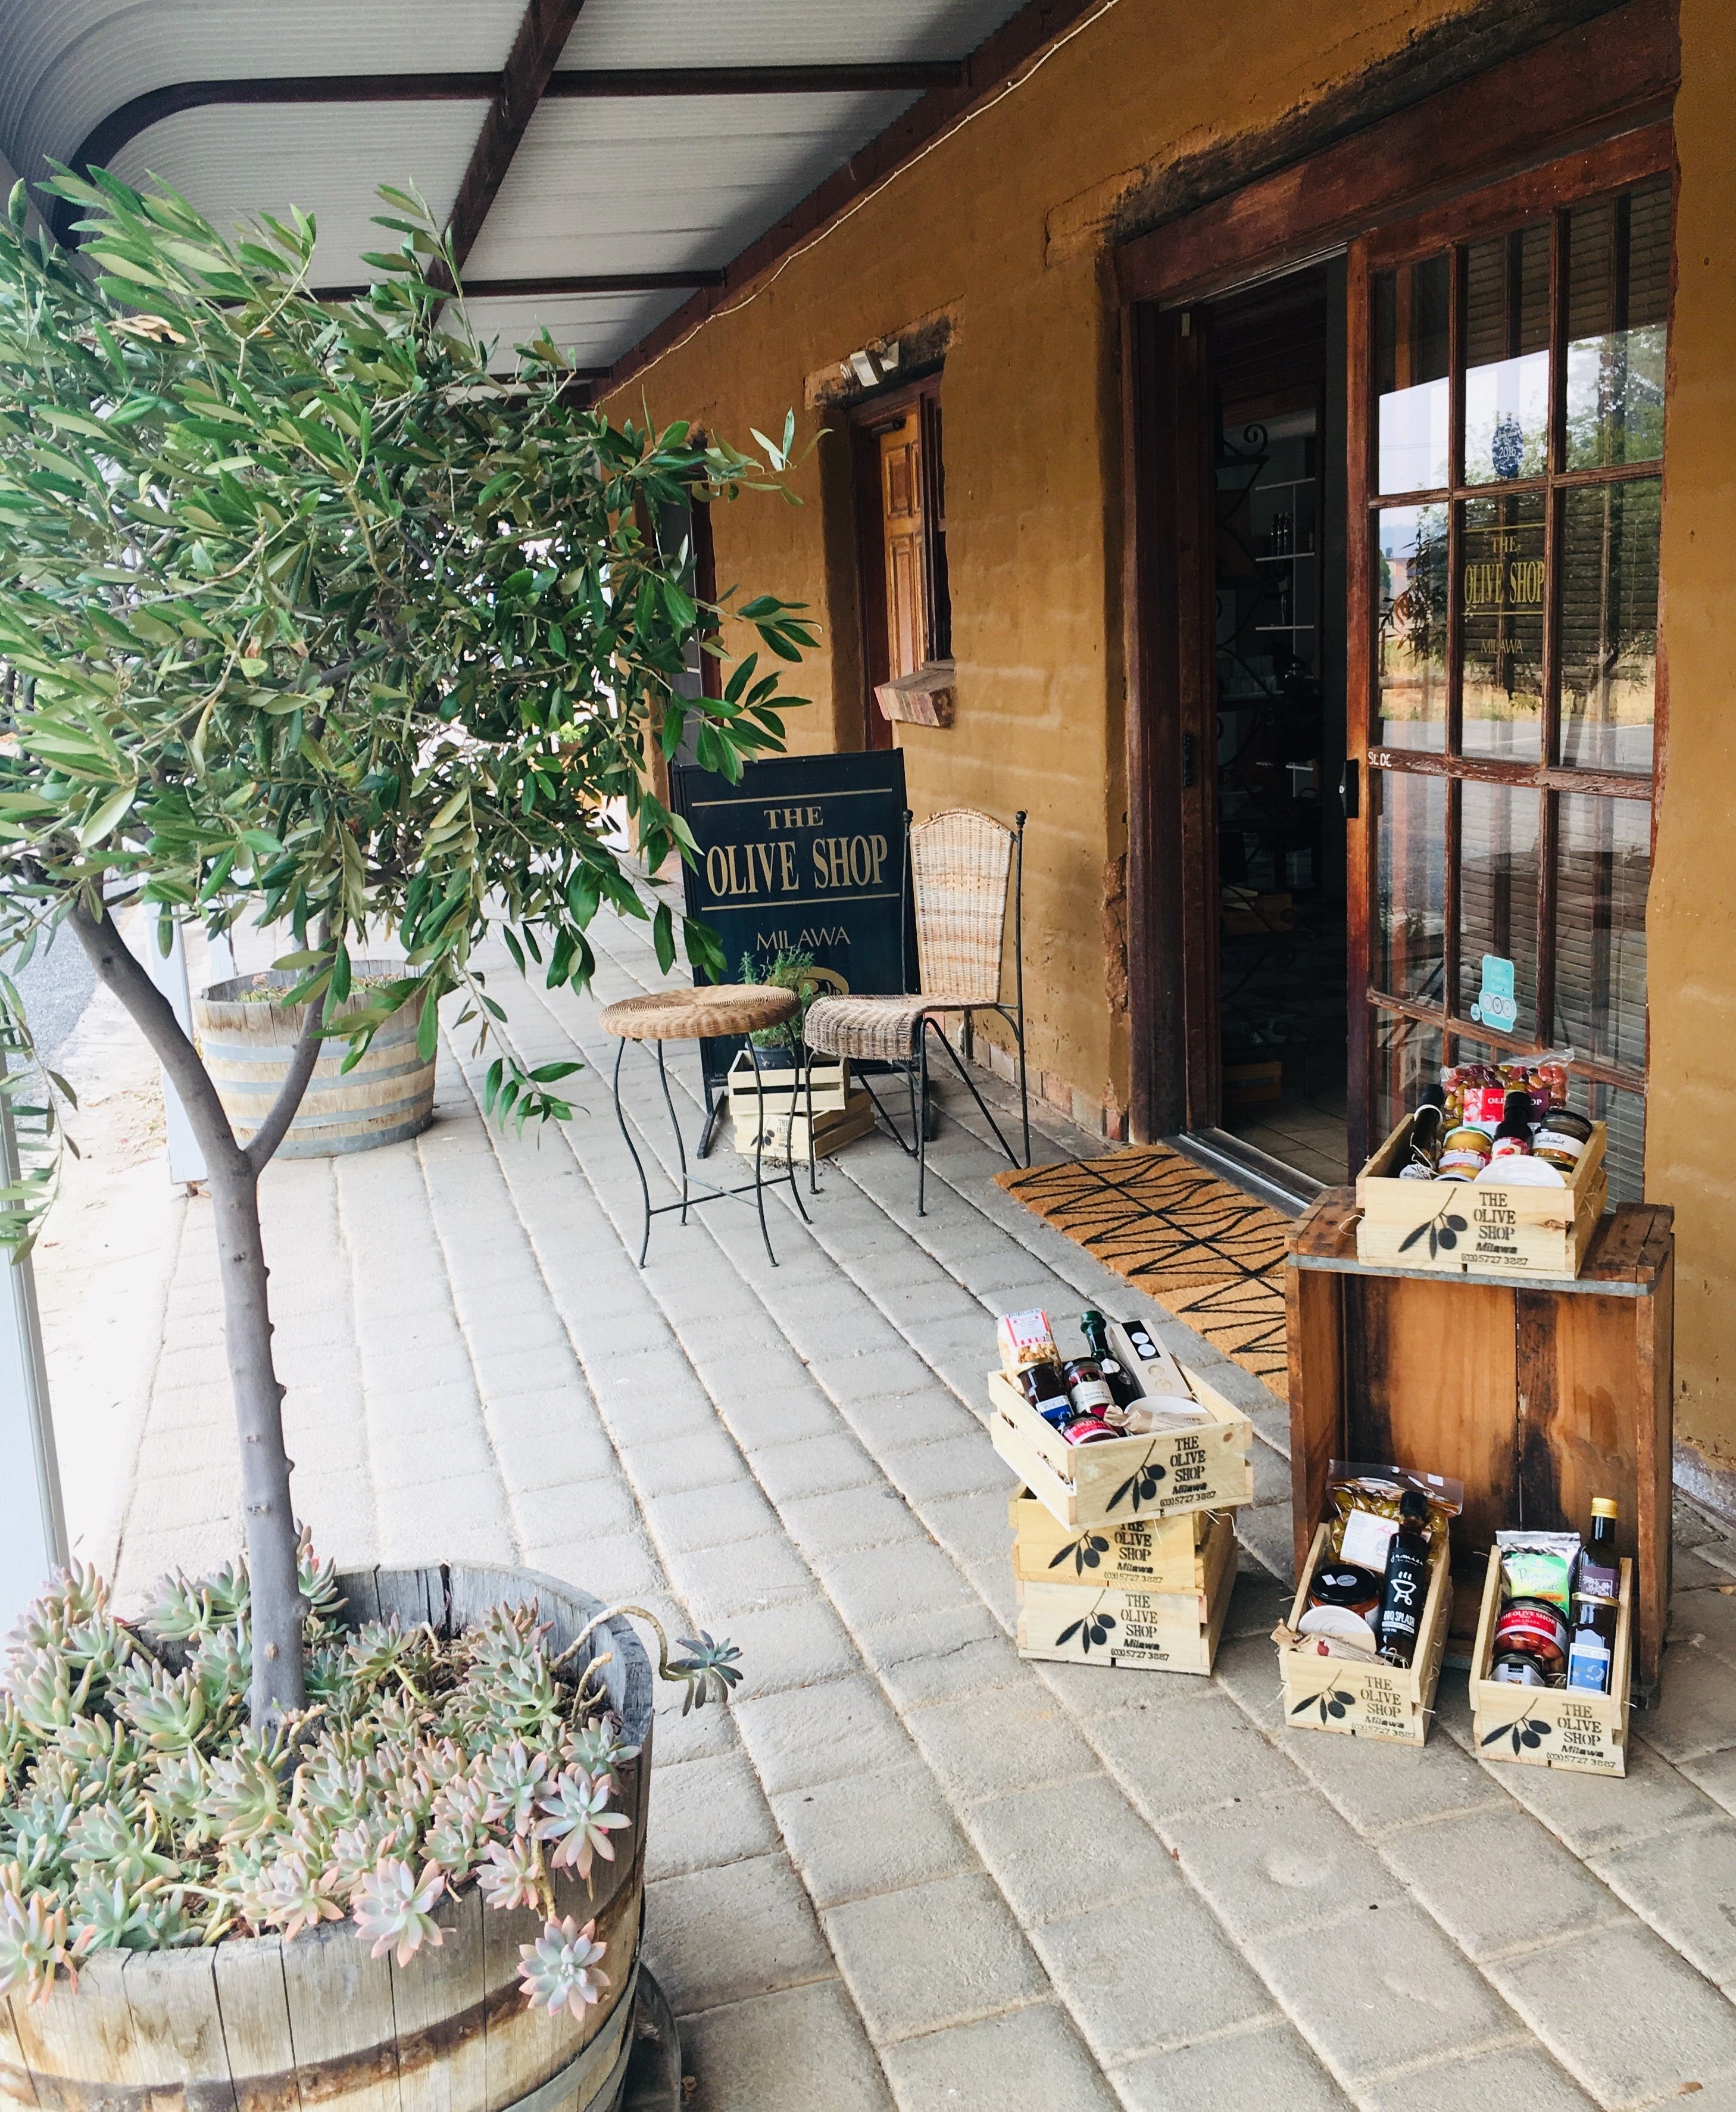 The Olive Shop - Milawa - Attractions